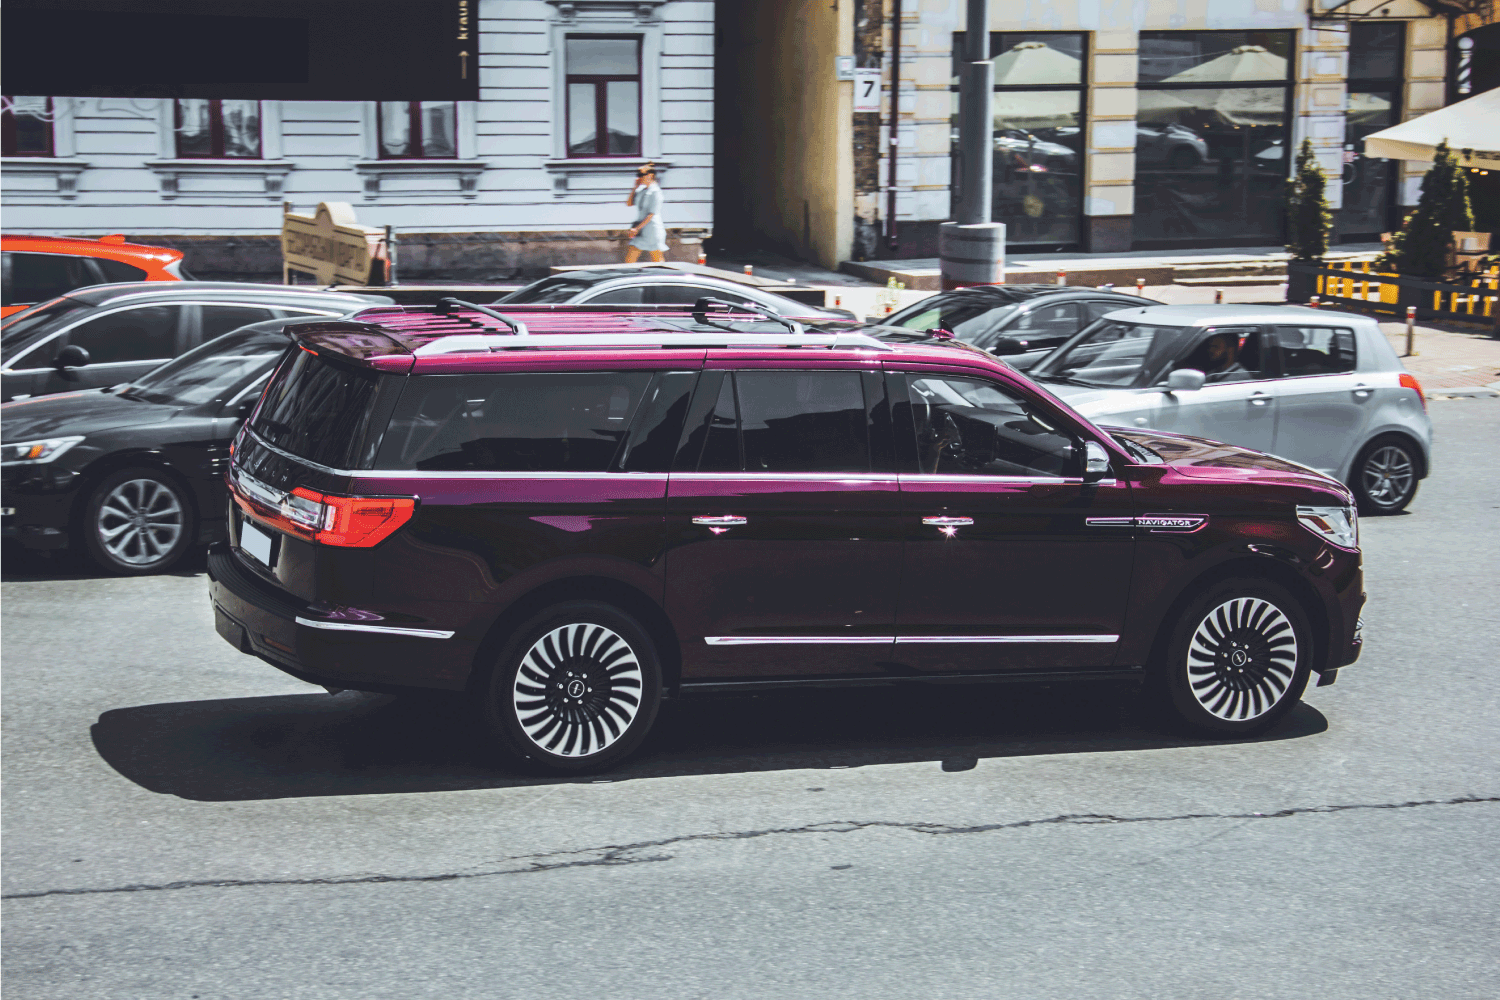 Large luxury SUV Lincoln Navigator in the city